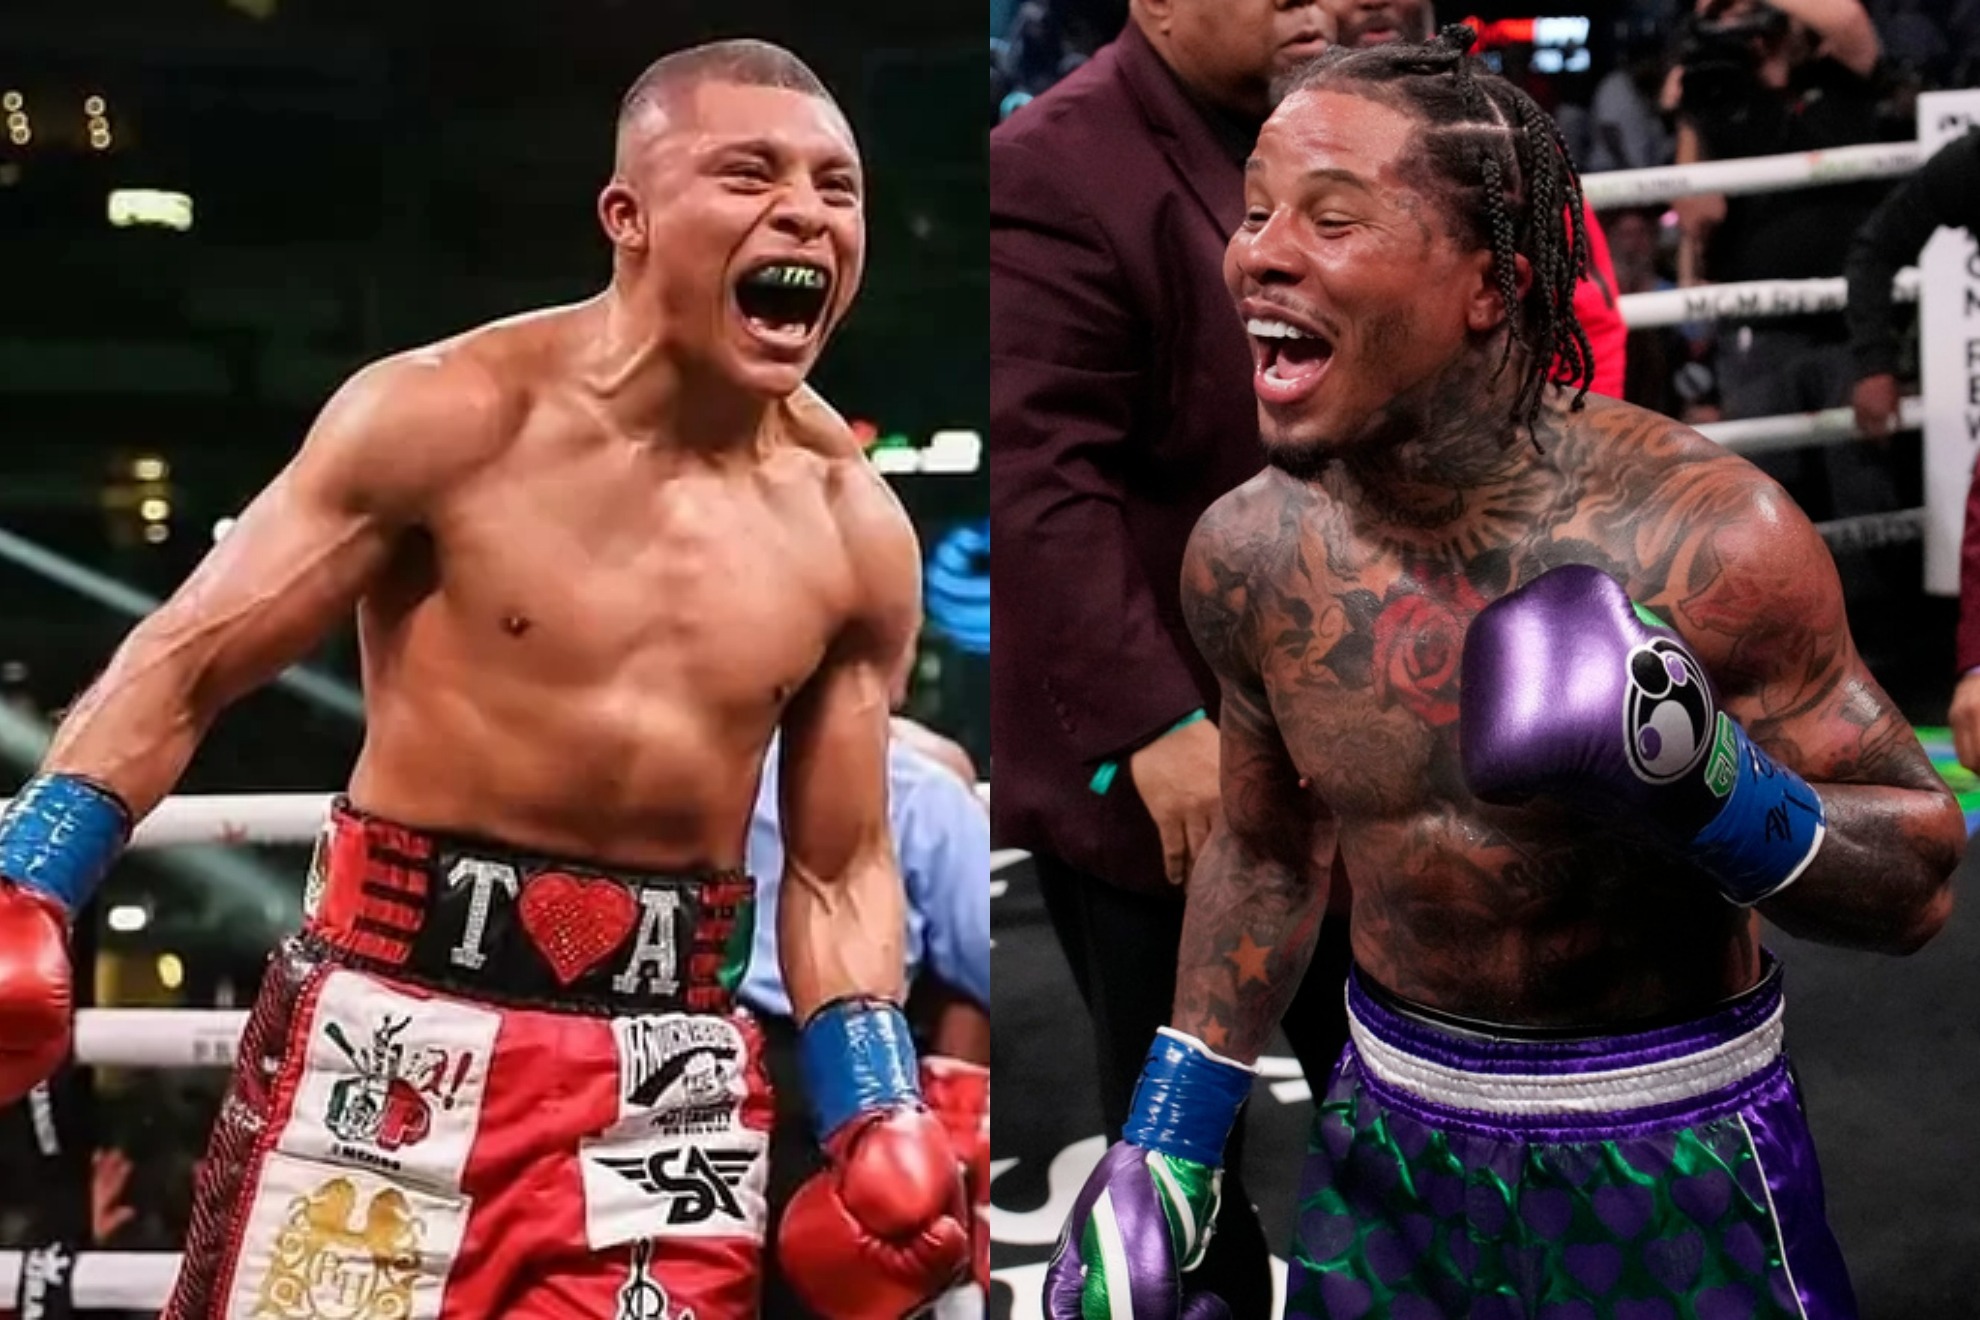 Gervonta Davis has his next contender, it's a rematch to put an end to the controversy, says Calvin Ford